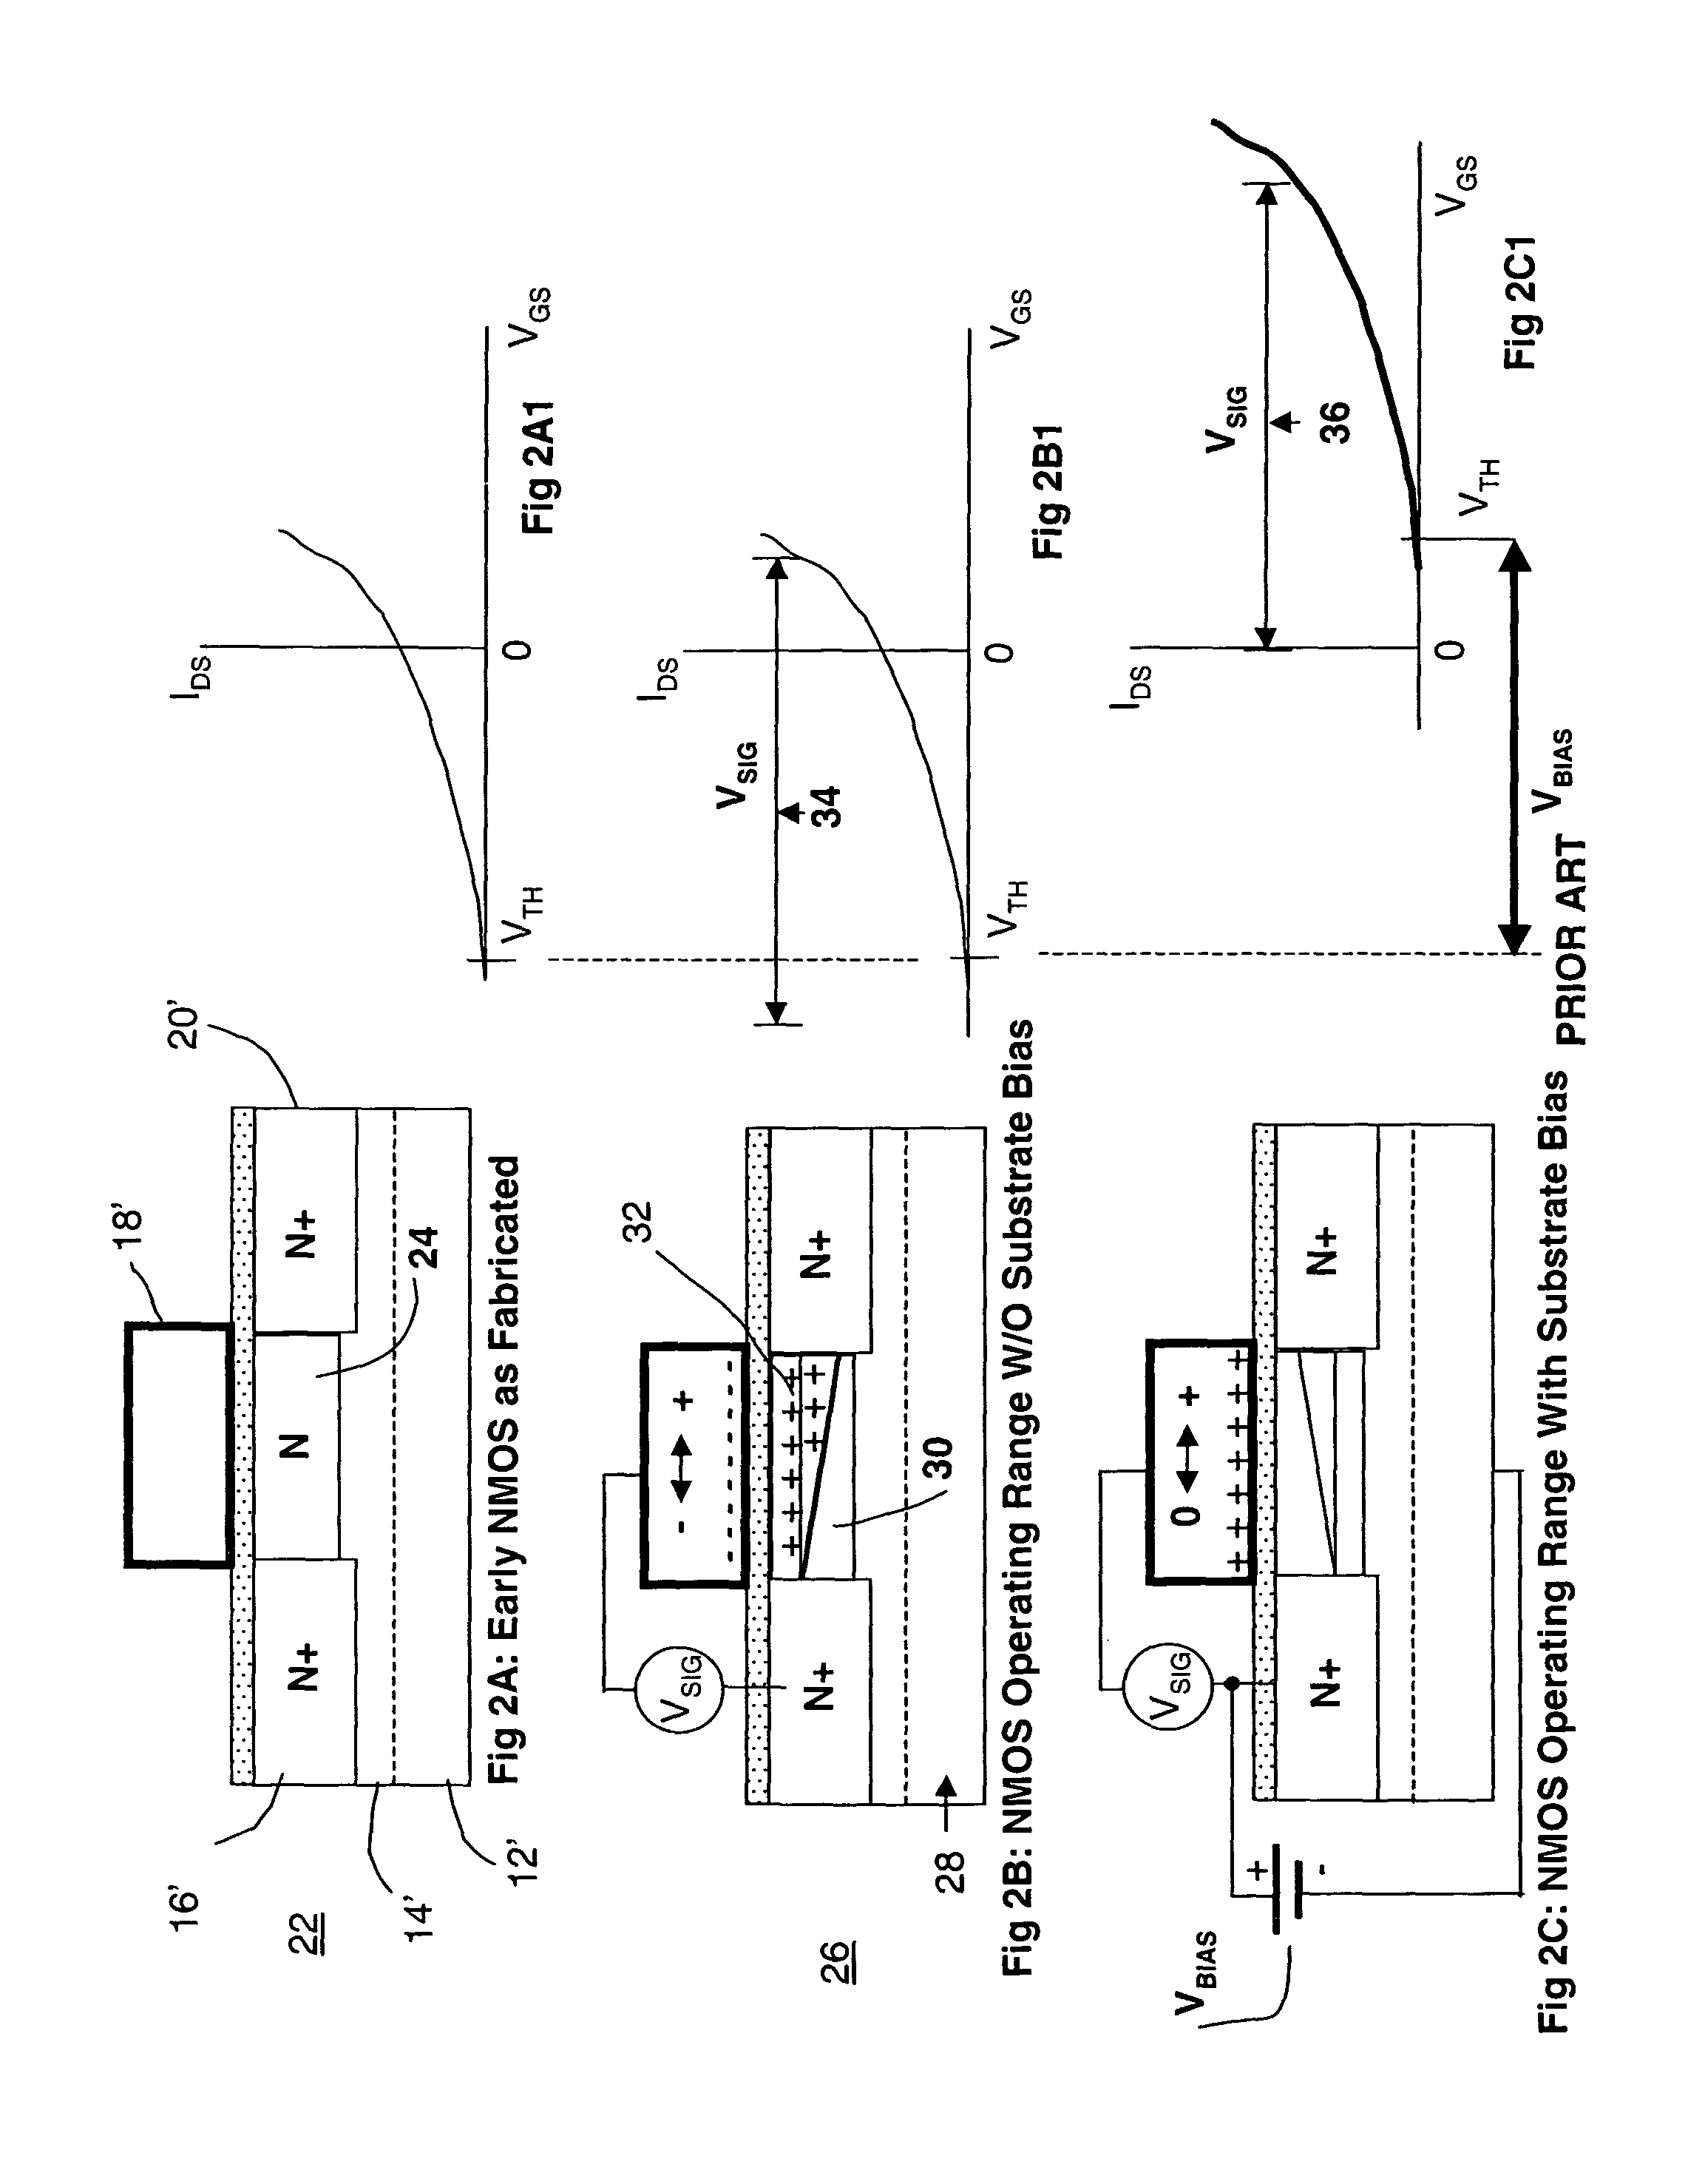 Field effect device having a channel of nanofabric and methods of making same